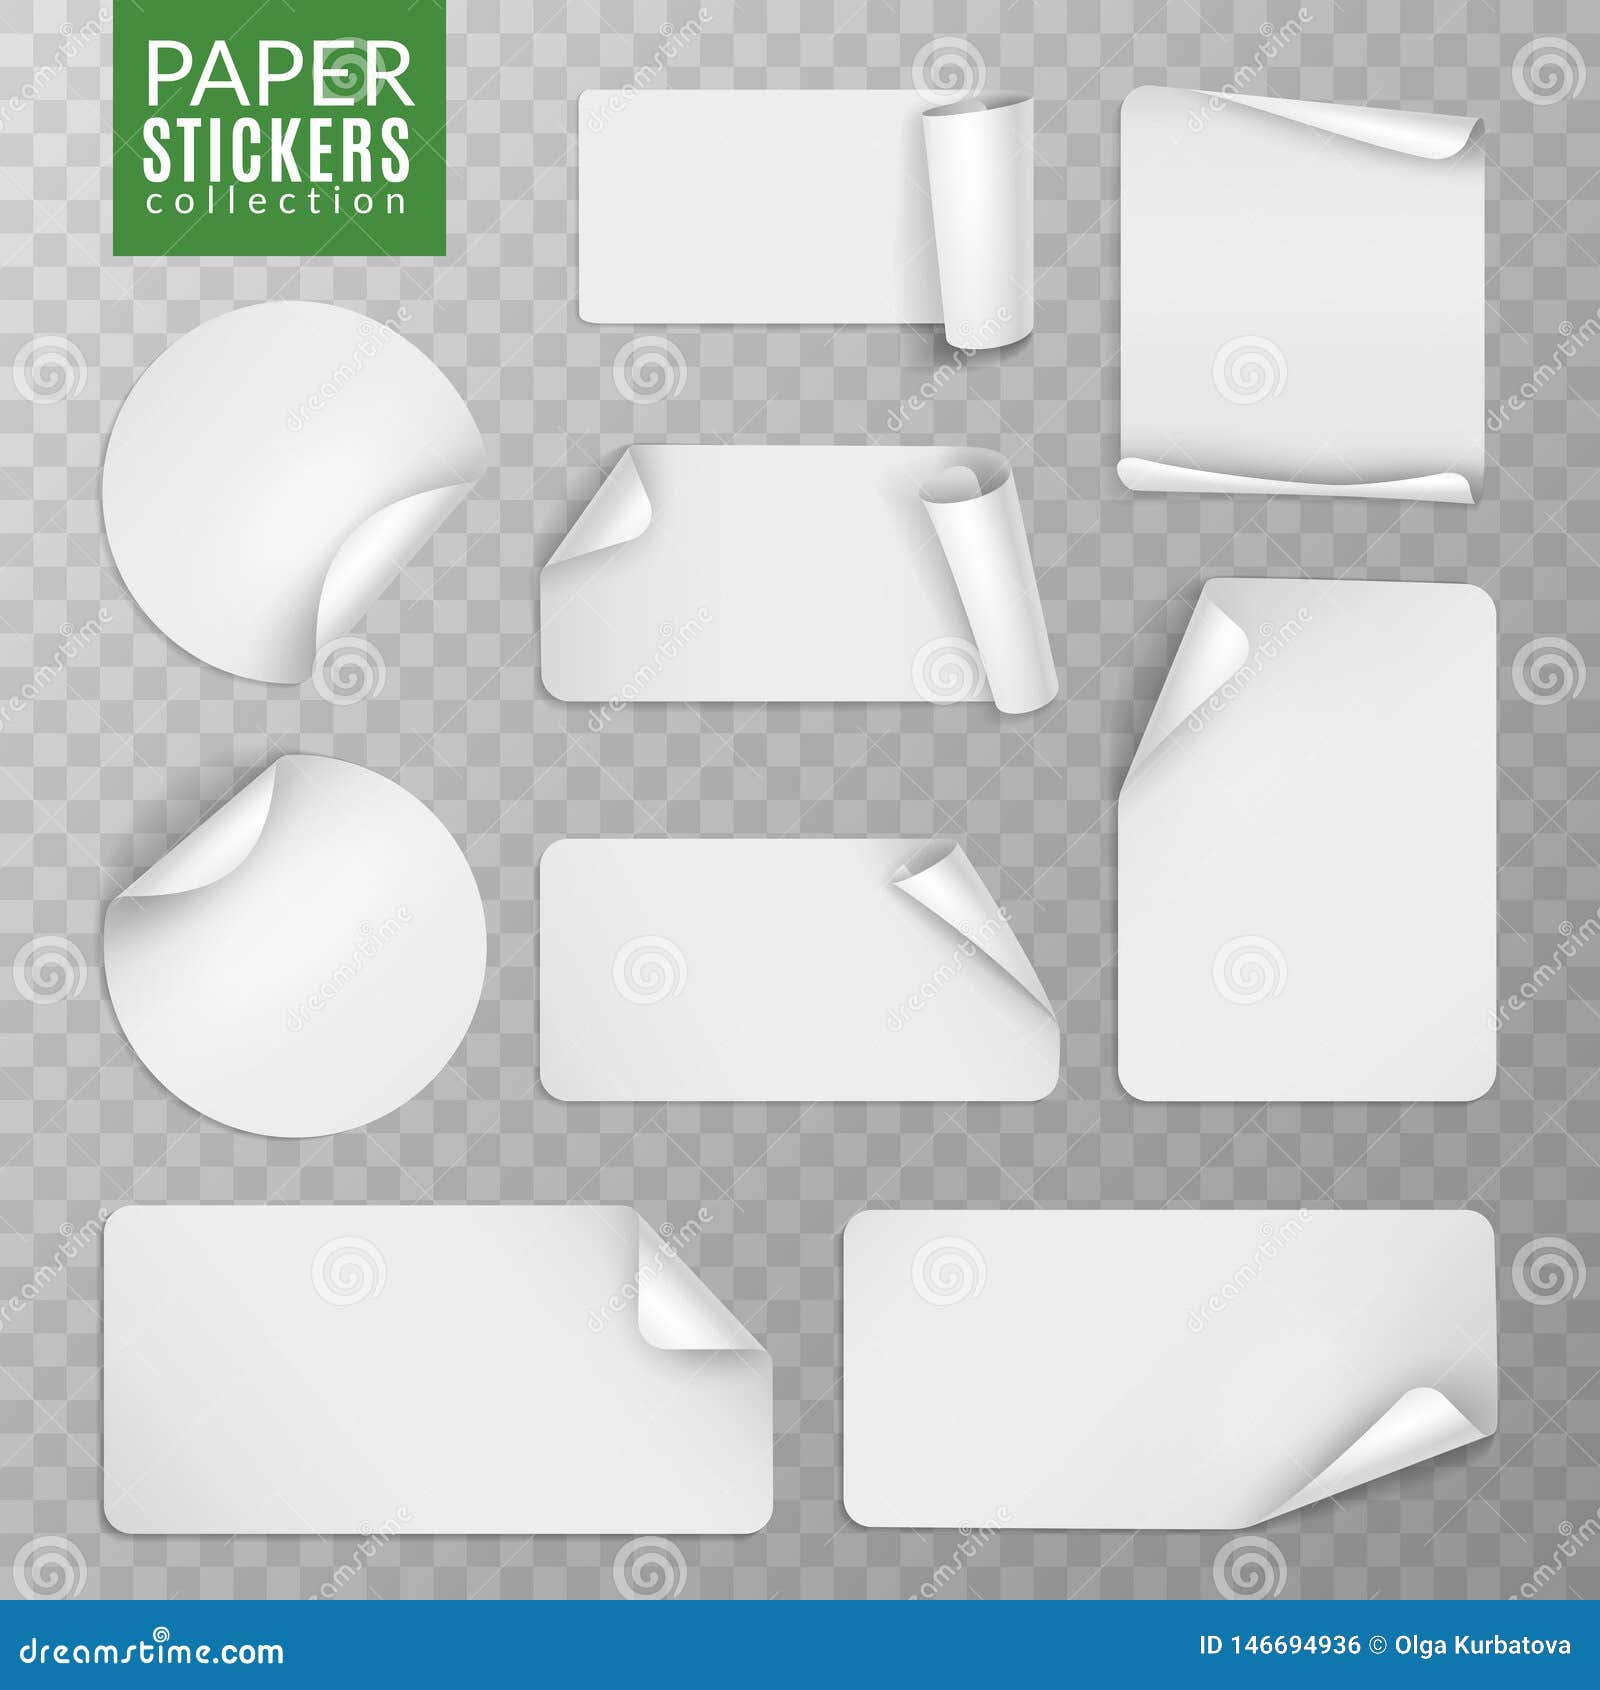 paper stickers set. white label sticker page, blank badge bent note sticky banners curled corners wrapped sheets. 